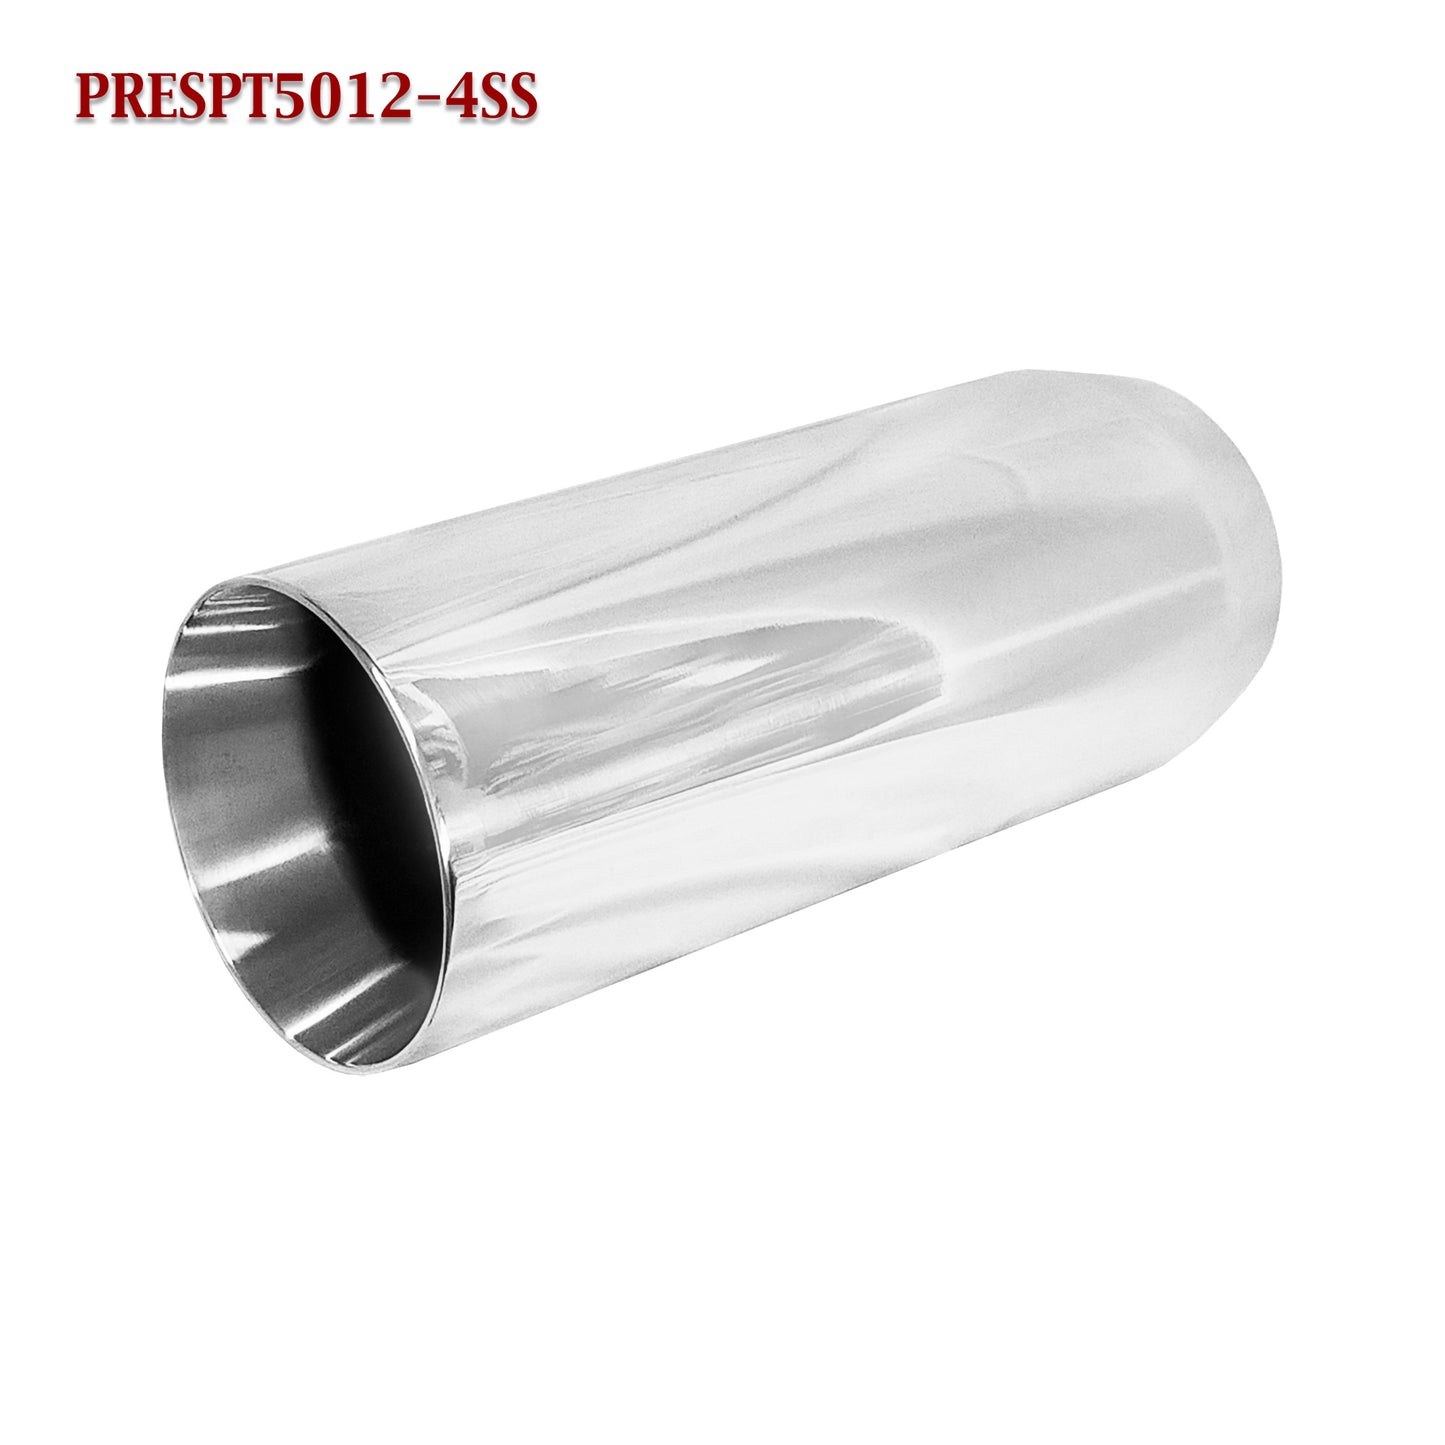 PRESPT5012-4SS 4" Stainless Resonated Diesel Truck Exhaust Tip 5" Outlet / 12" Long